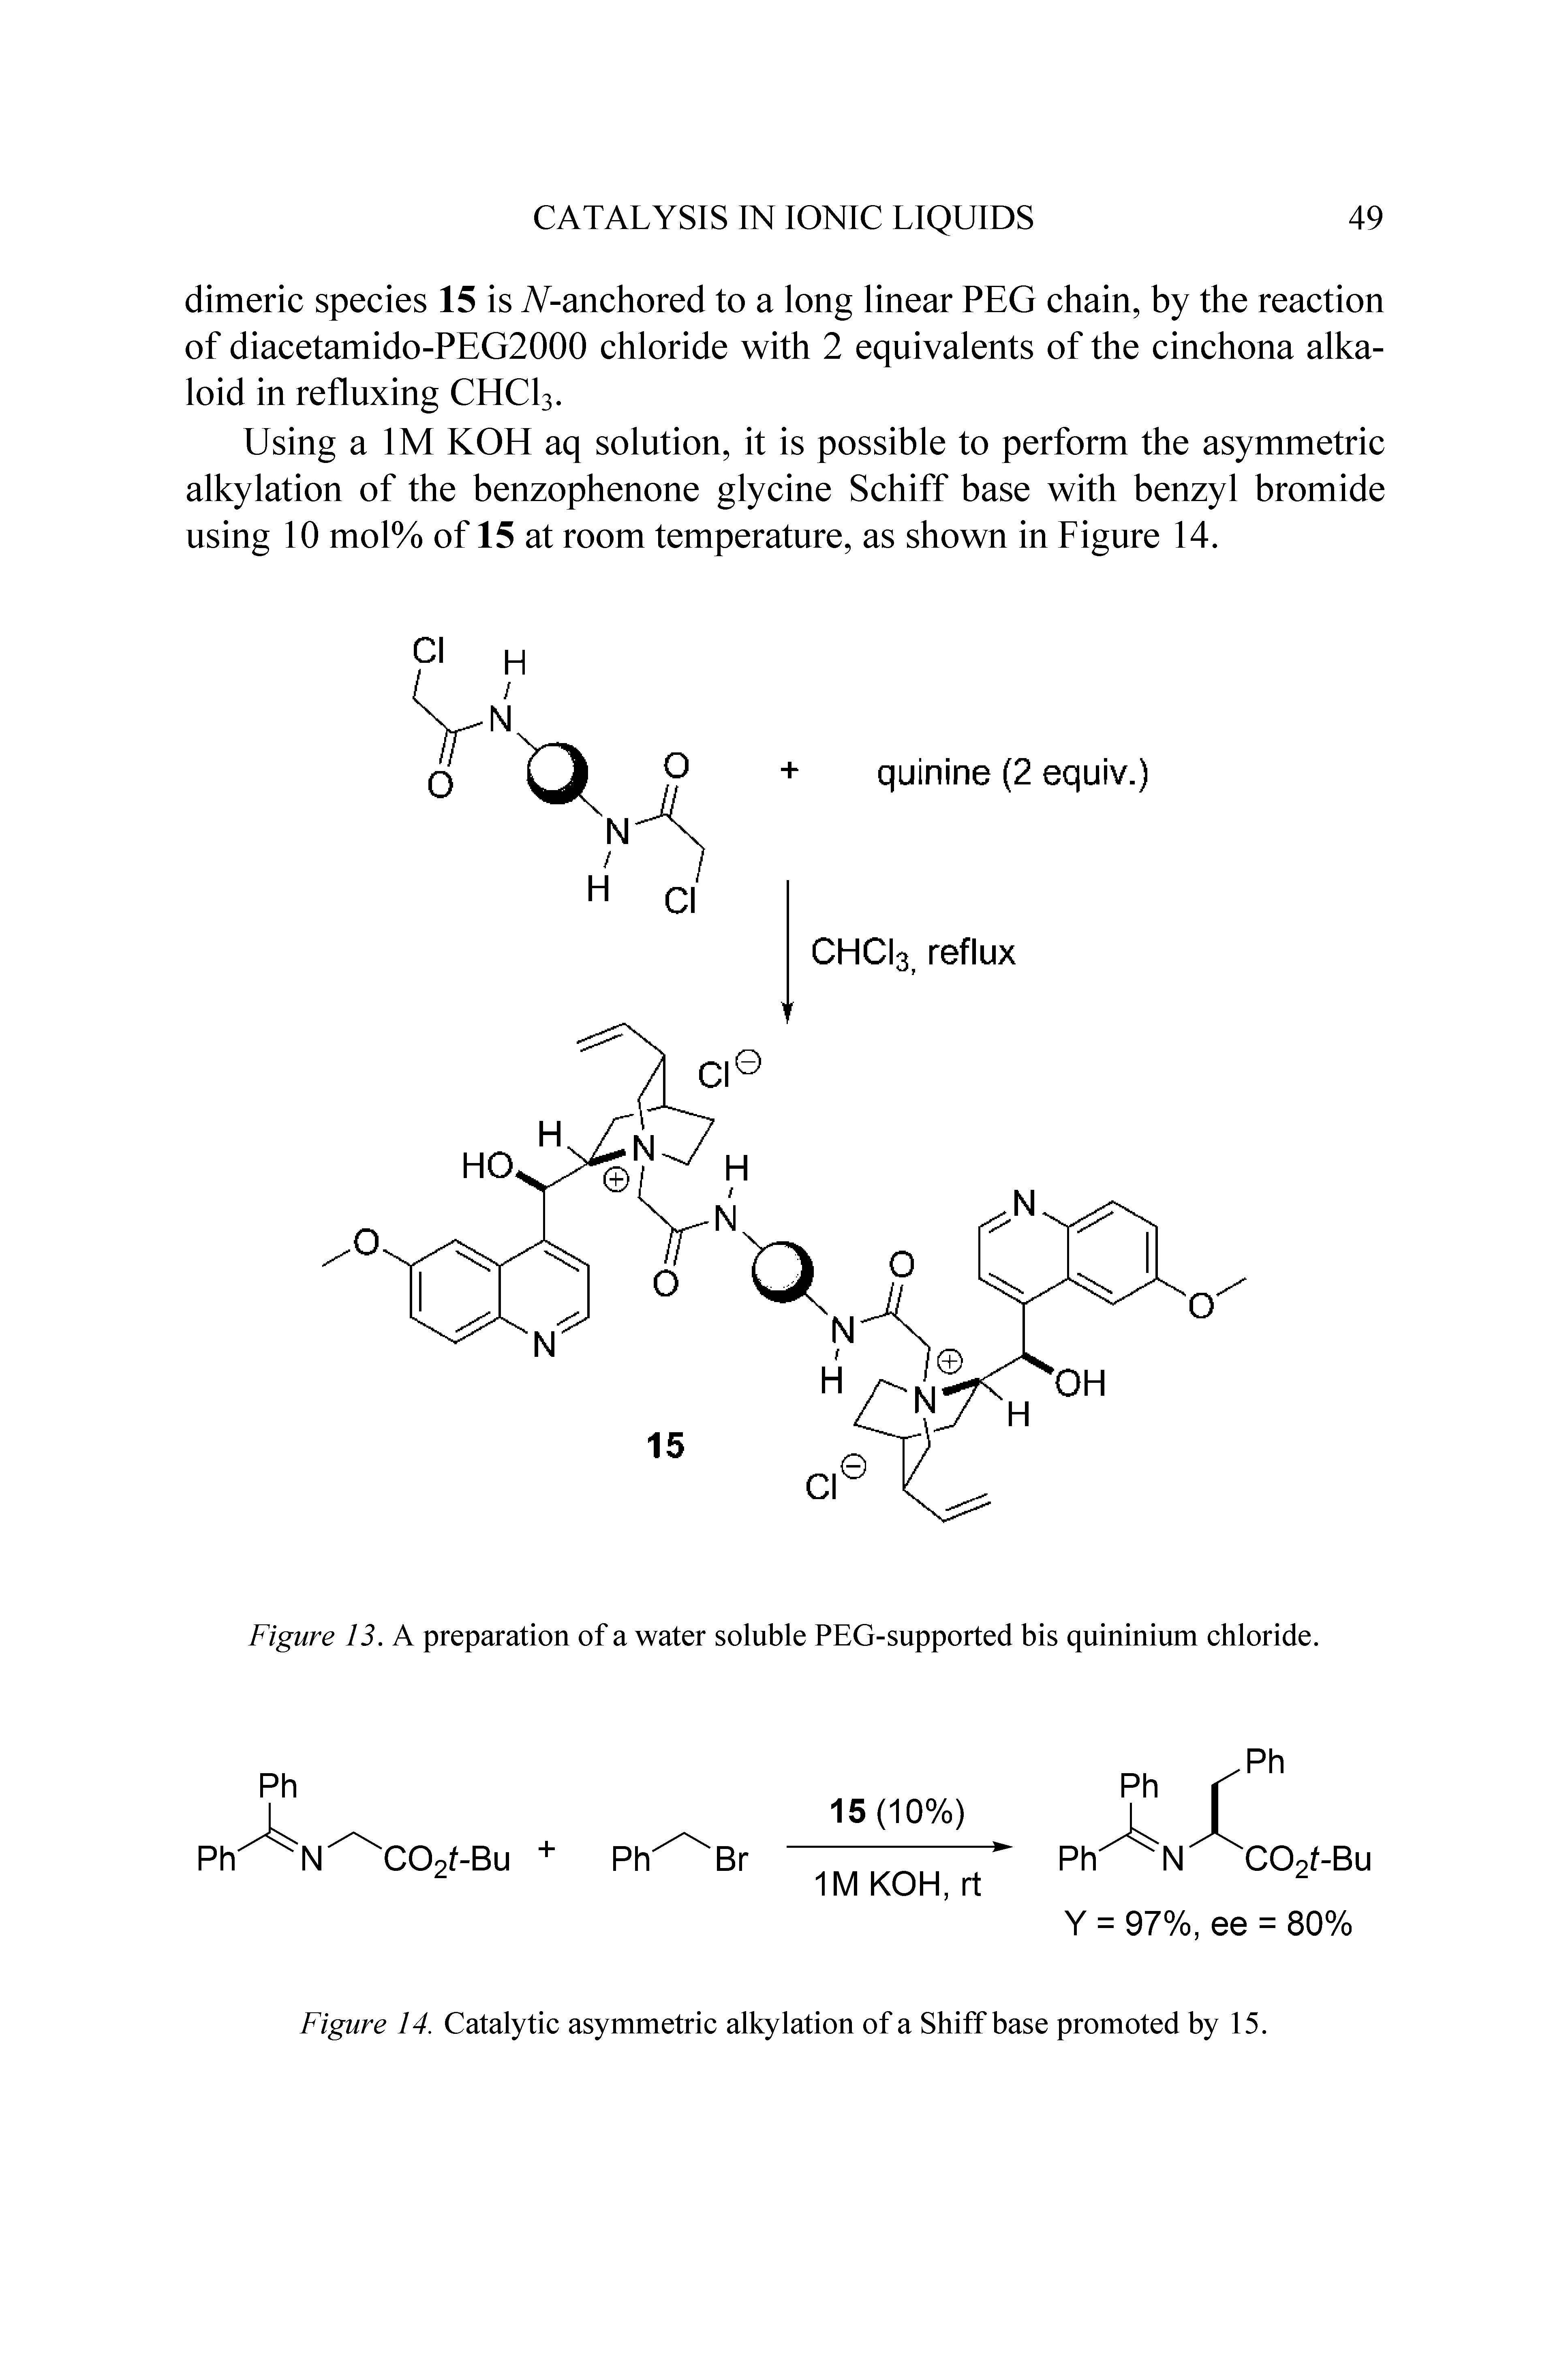 Figure 14. Catalytic asymmetric alkylation of a Shiff base promoted by 15.